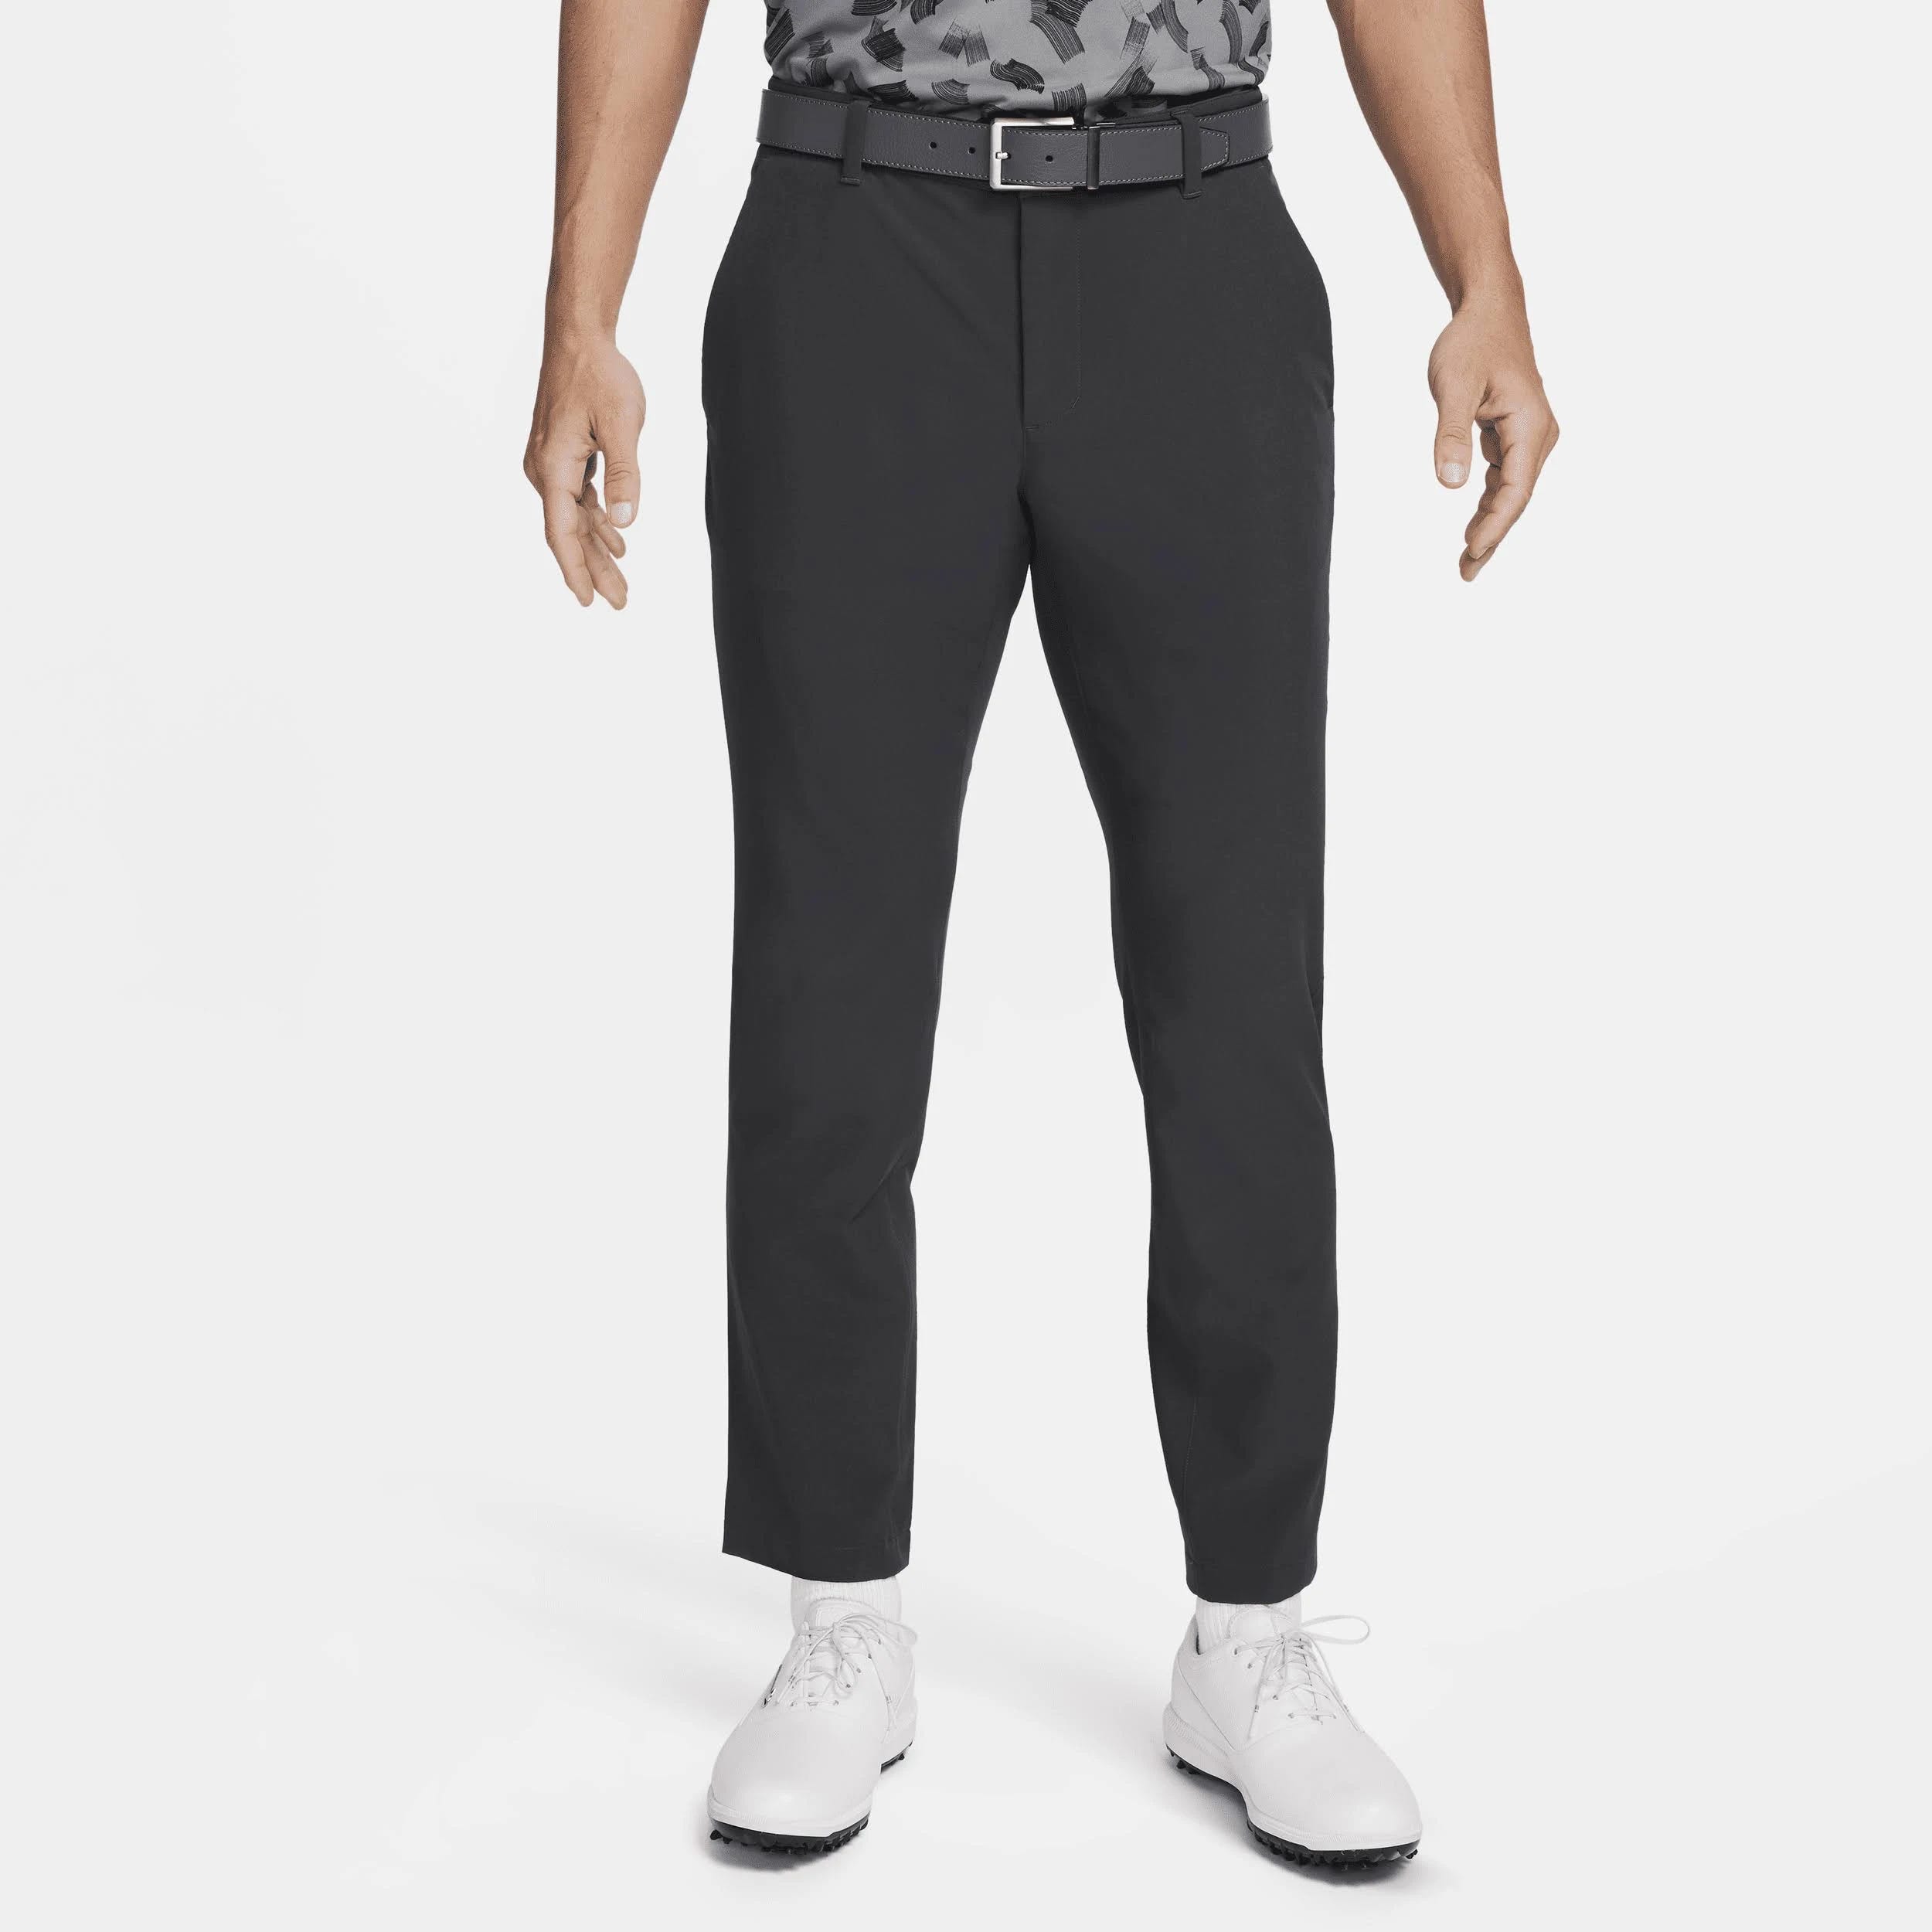 Nike Tour Repel Flex Lightweight Golf Pants for Comfortable Play | Image